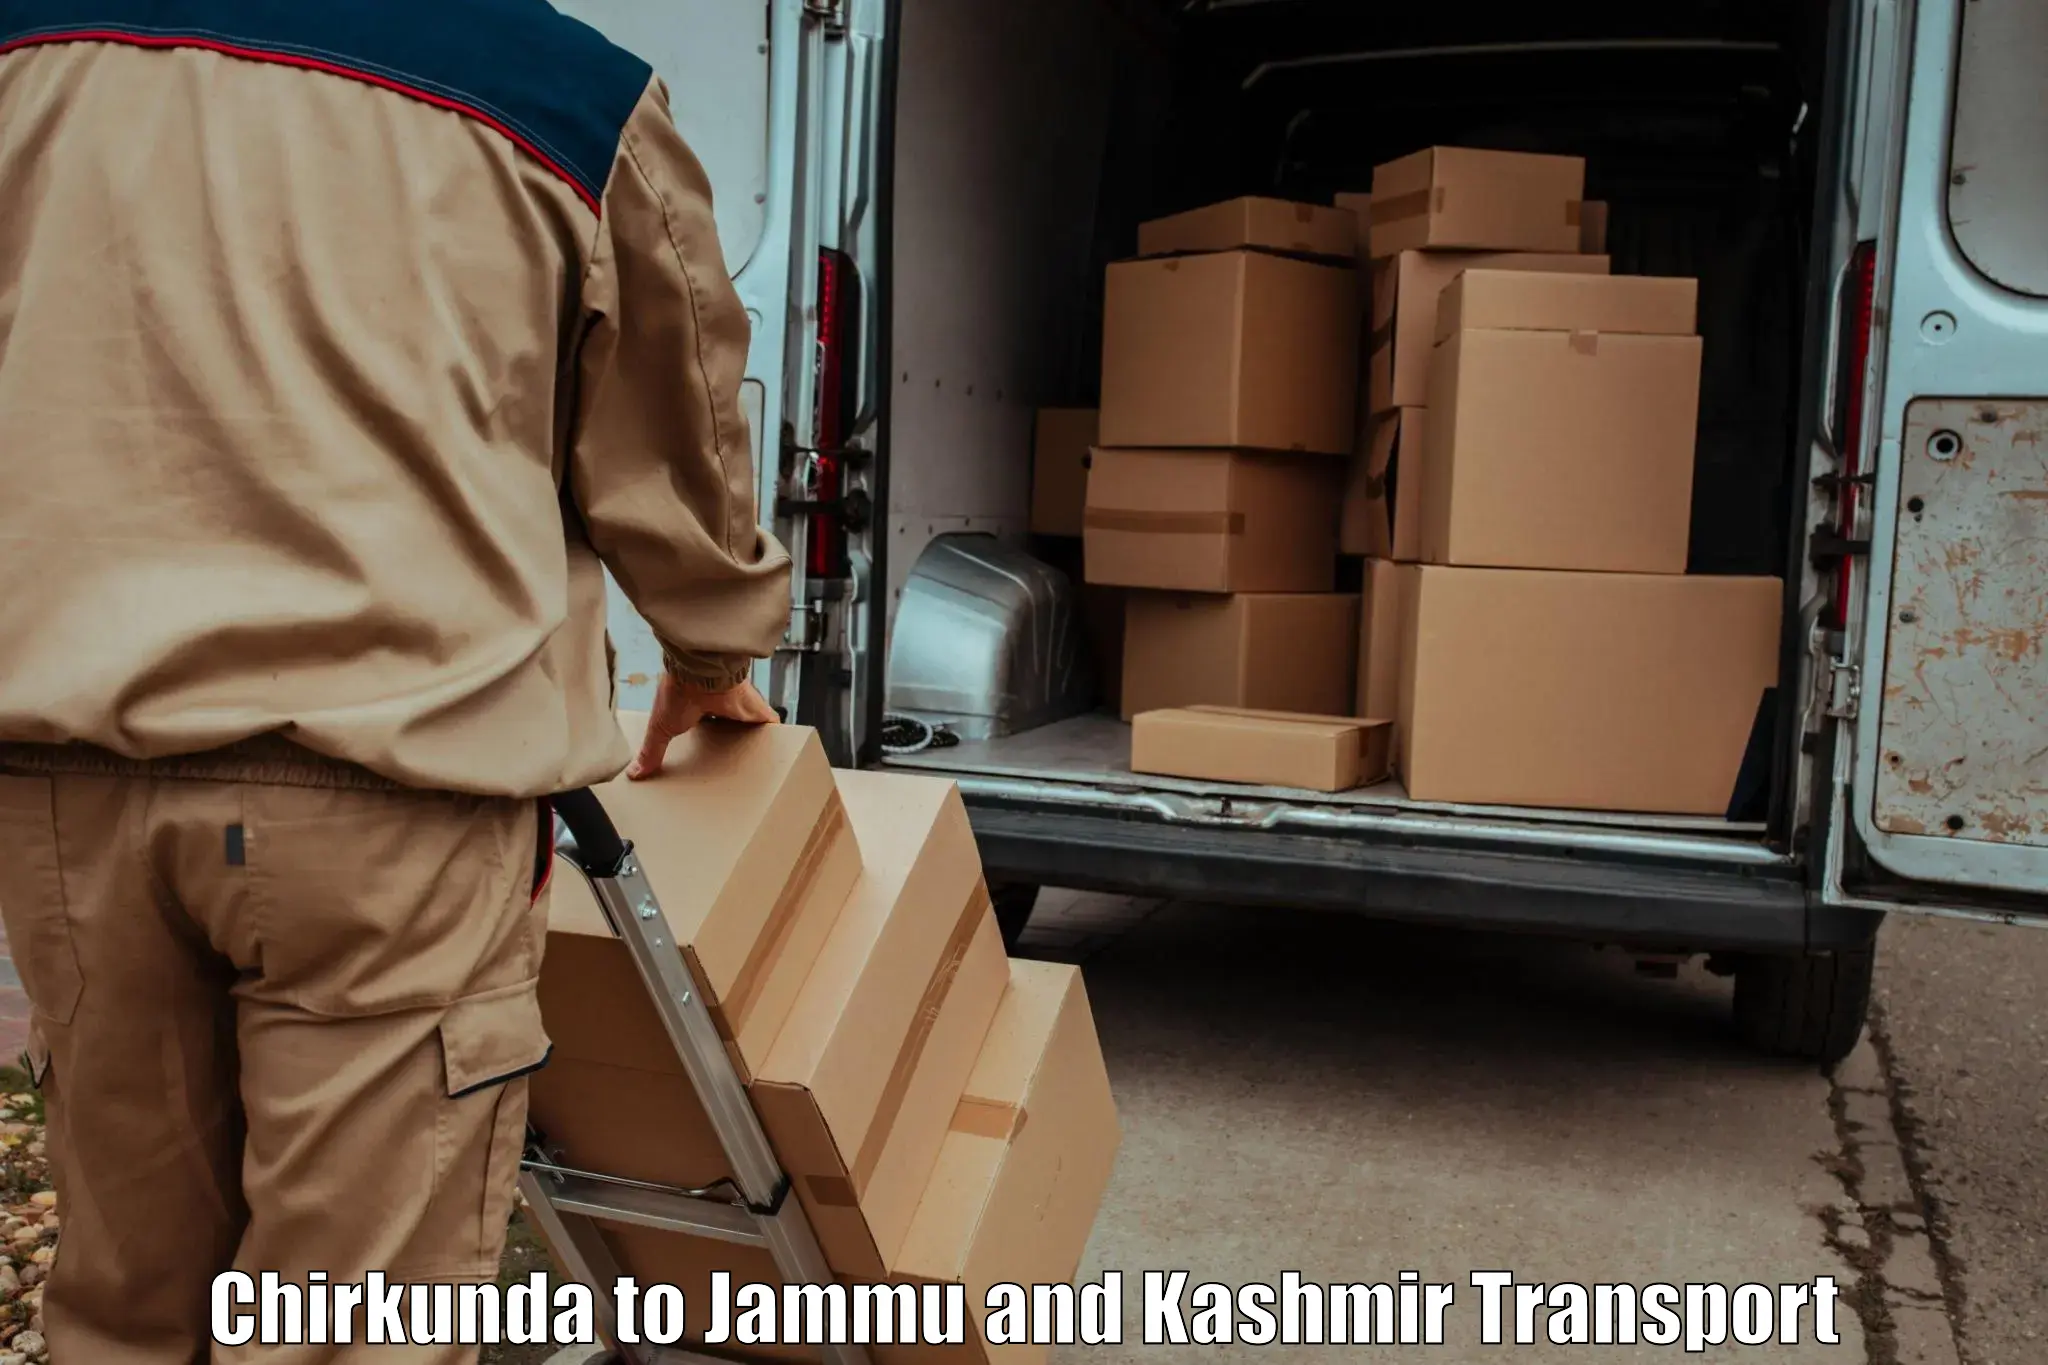 Air freight transport services Chirkunda to Shopian